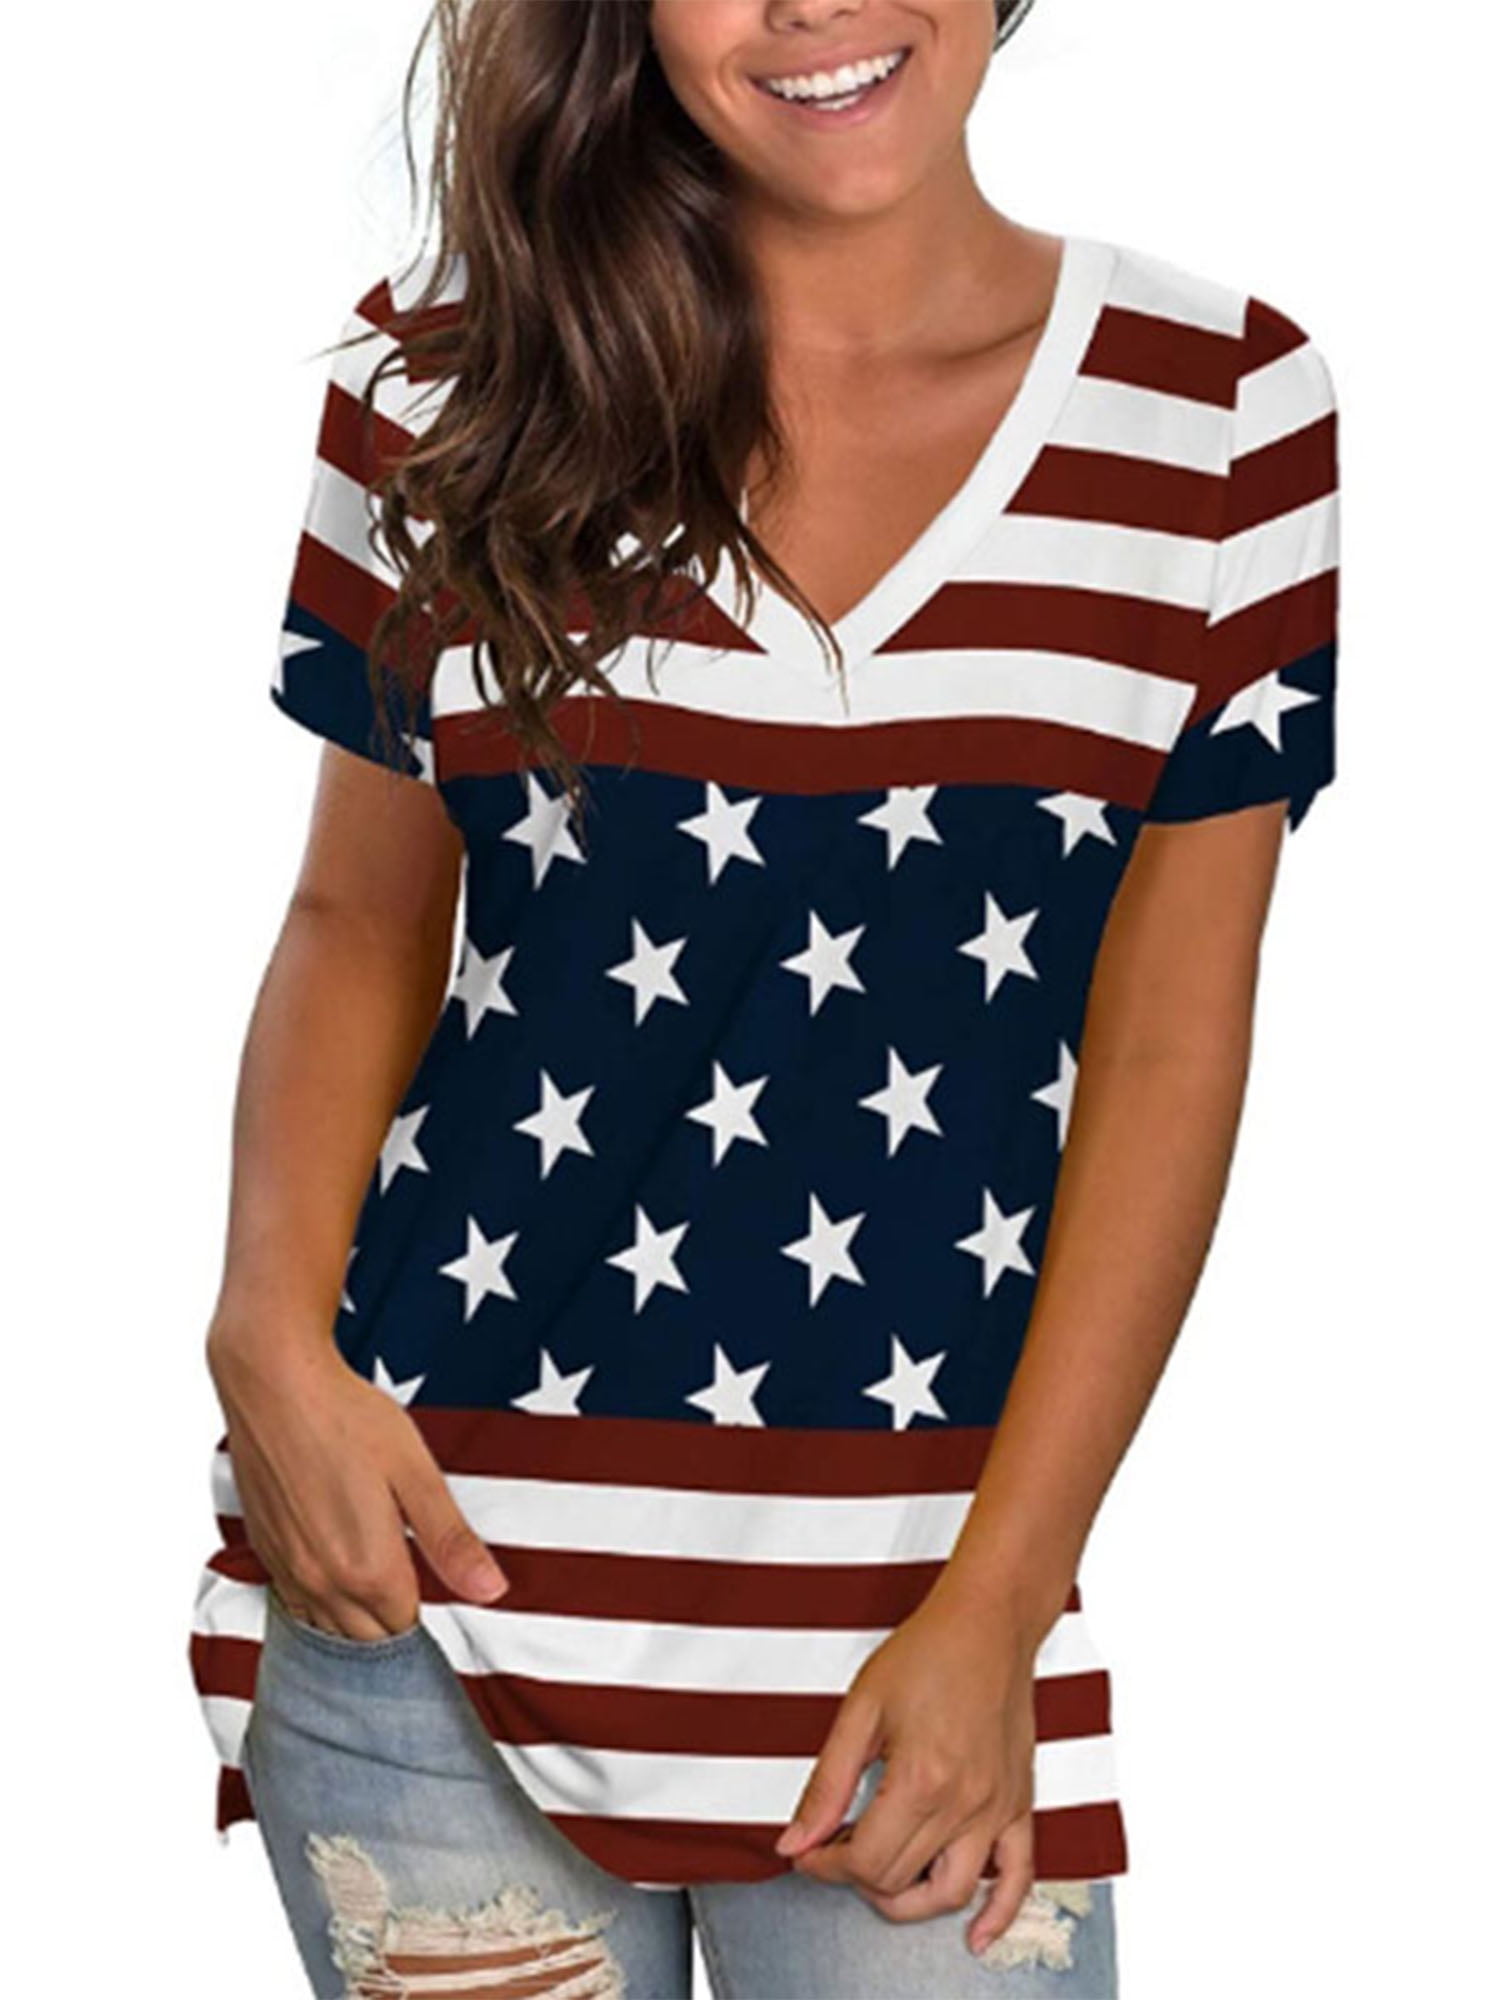 Midress Women Plus Size Casual Flag Star Print Off Shoulder Slings Sleeve Top T-Shirt Tank Tops Hollow Out Tee Tops Blouse T-Shirt